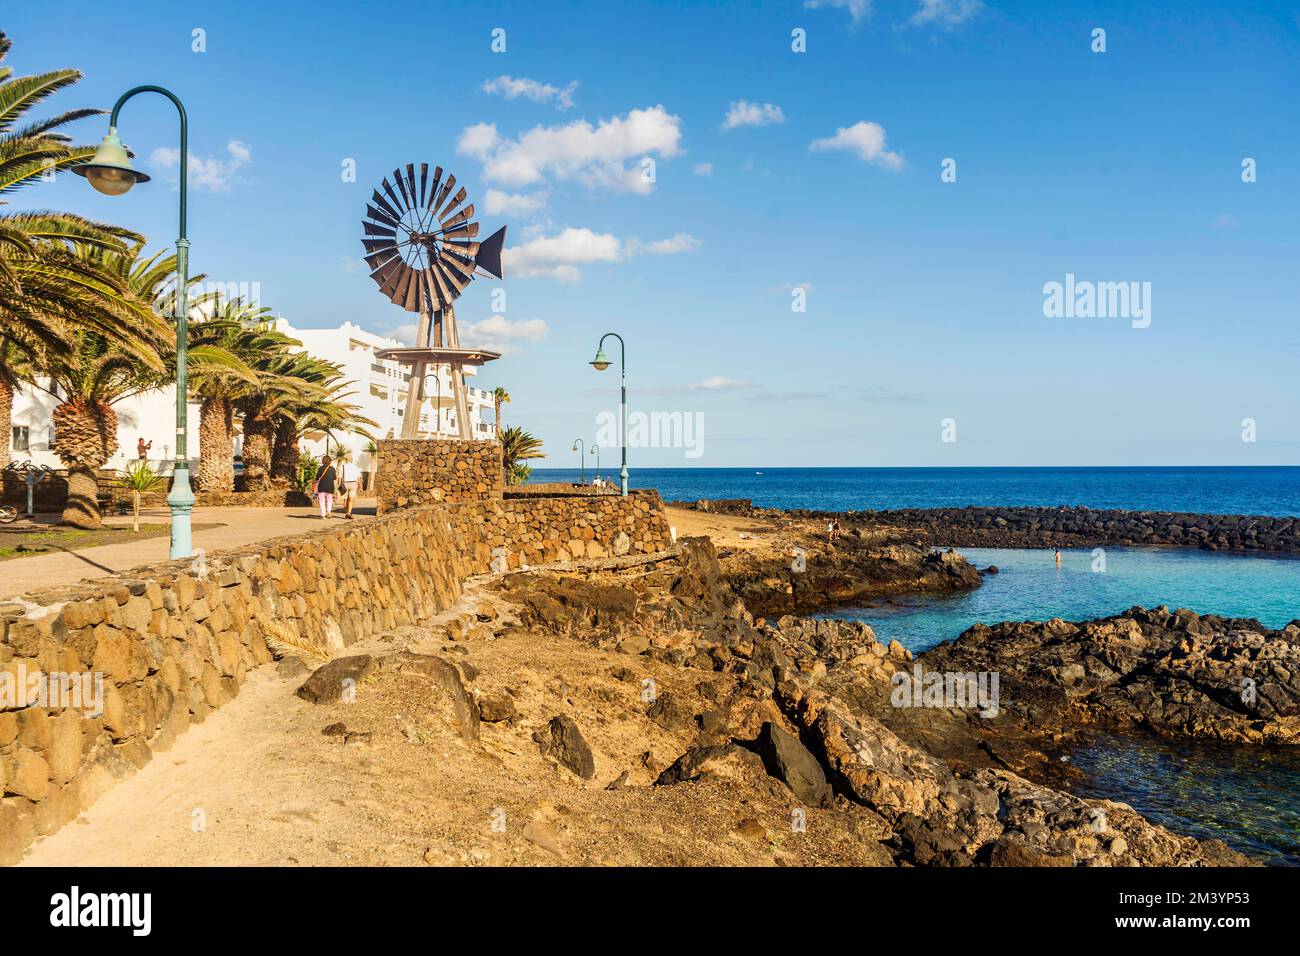 View of the resort town named Costa Teguise, Lanzarote, Canary Island, Spain Stock Photo